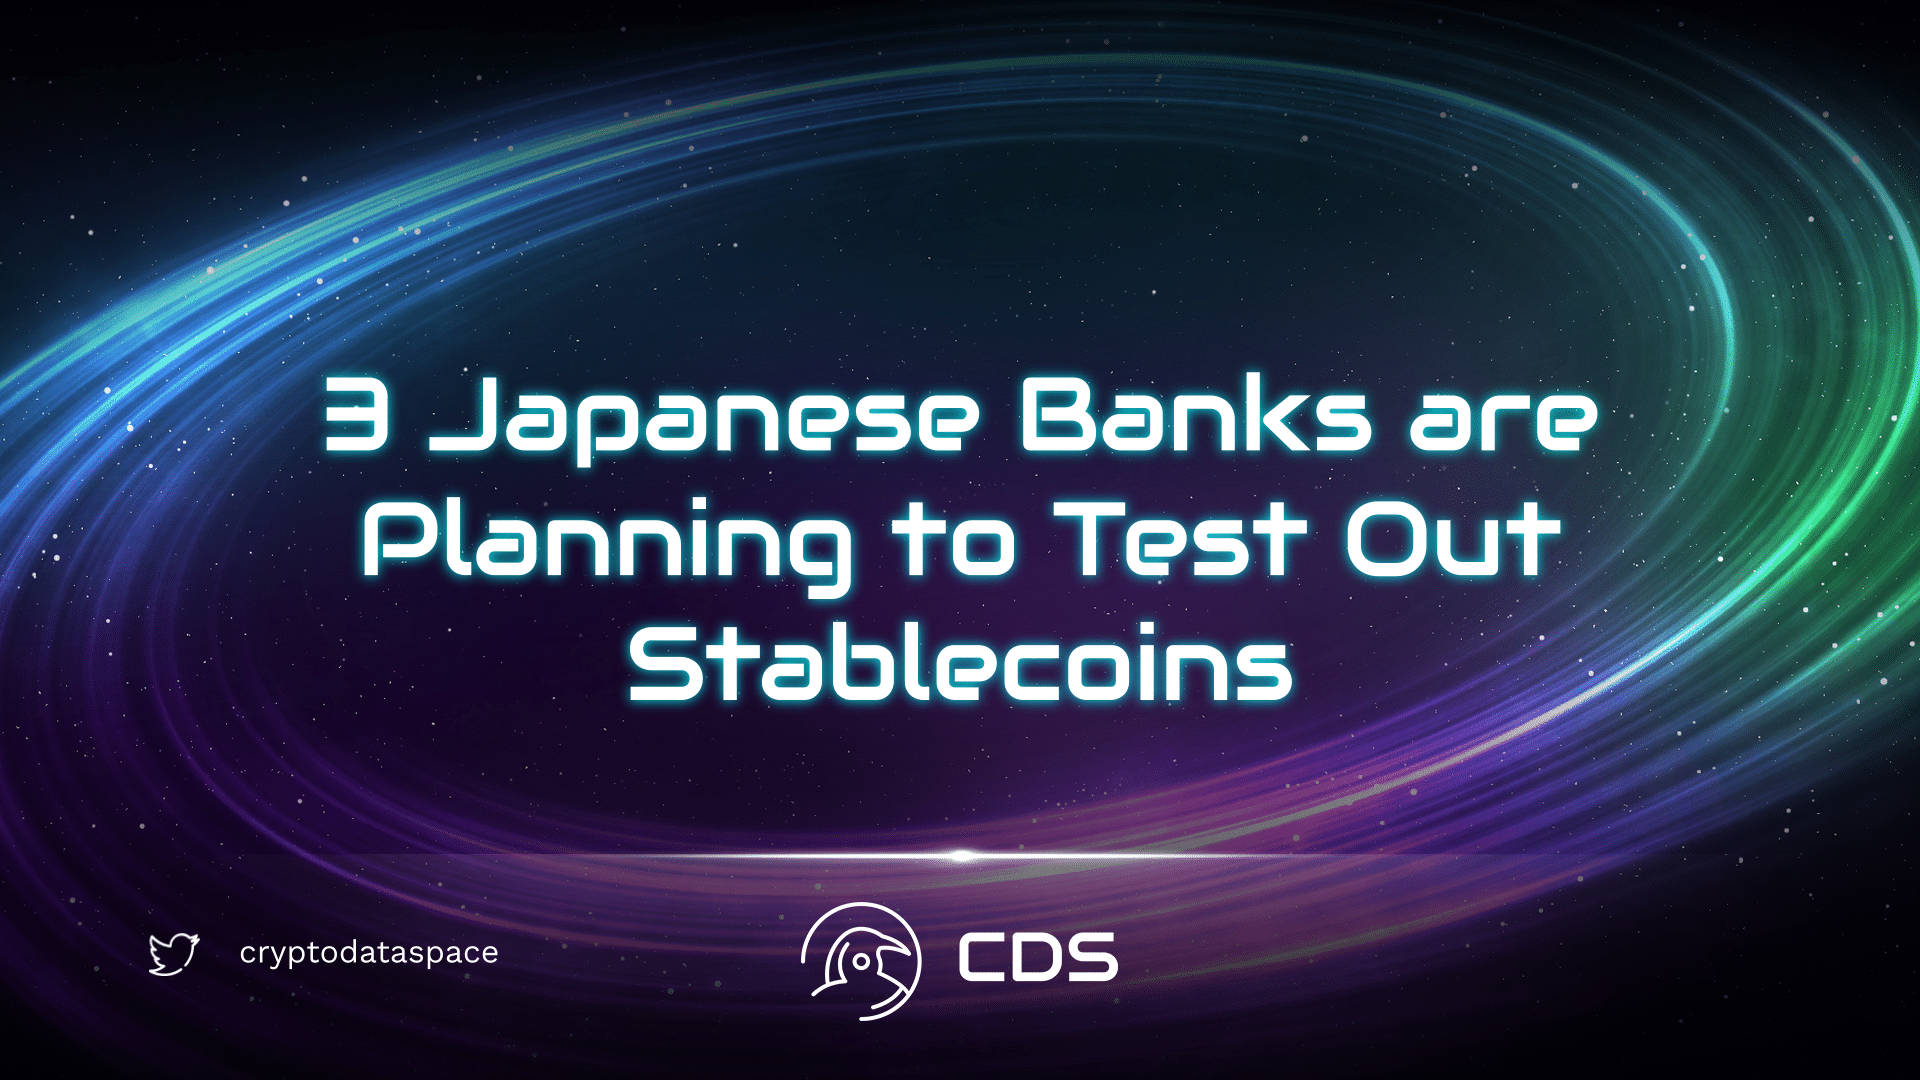 3 Japanese Banks are Planning to Test Out Stablecoins